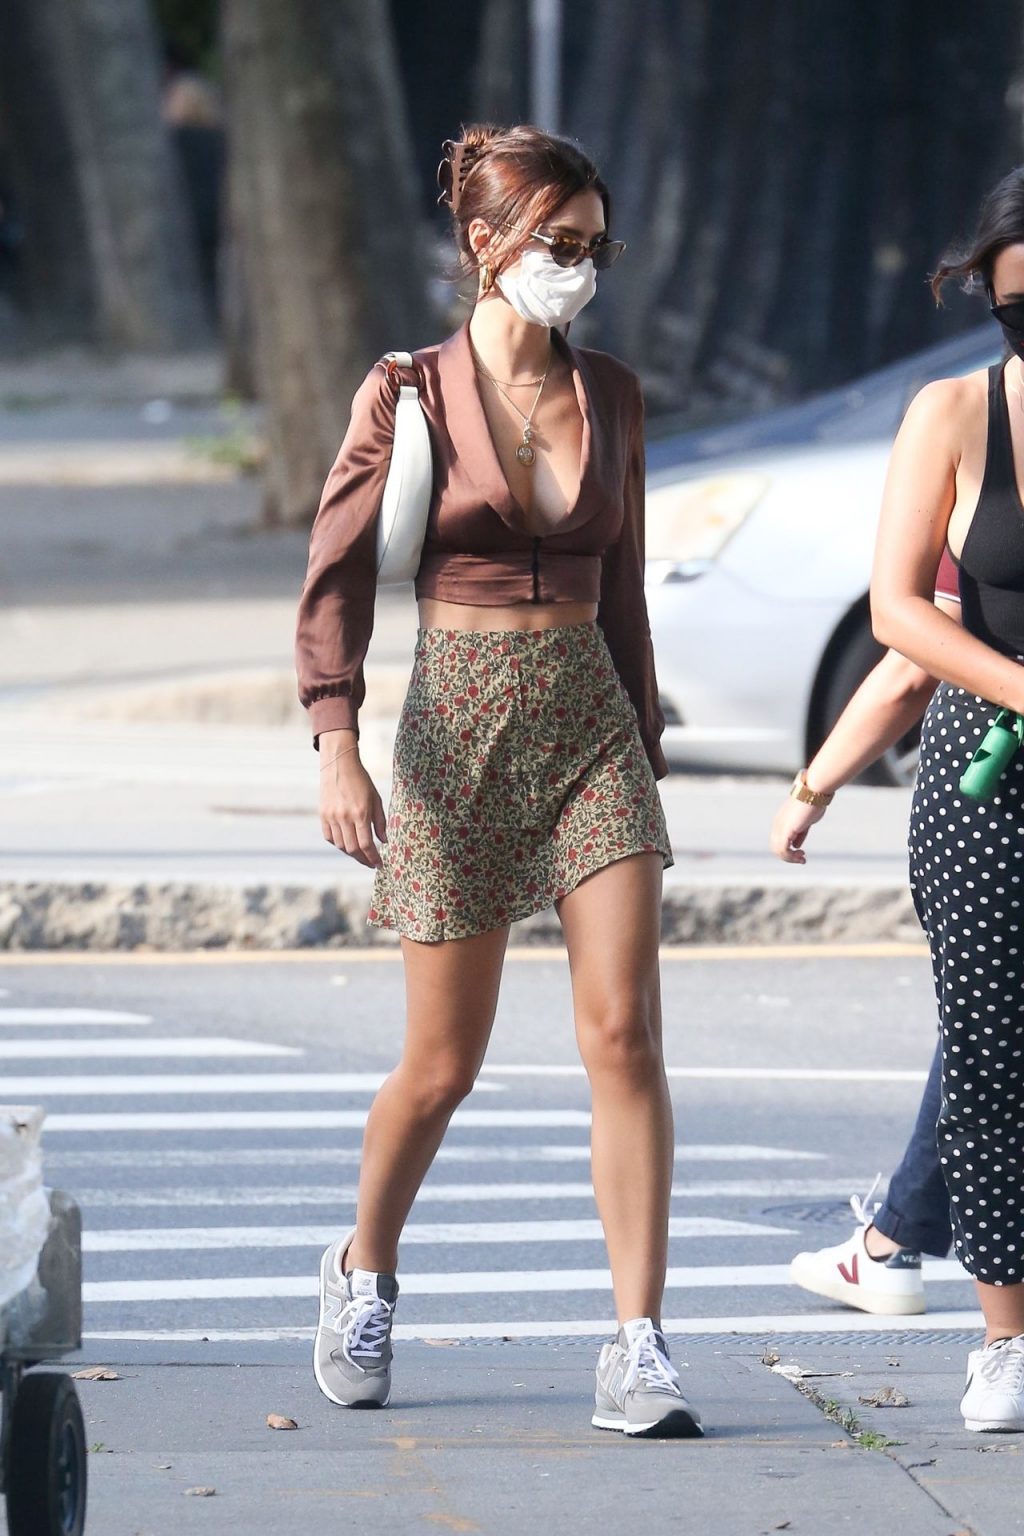 Emily Ratajkowski Displays Her Sexy Legs and Tits While on a Walk in NYC (38 Photos)